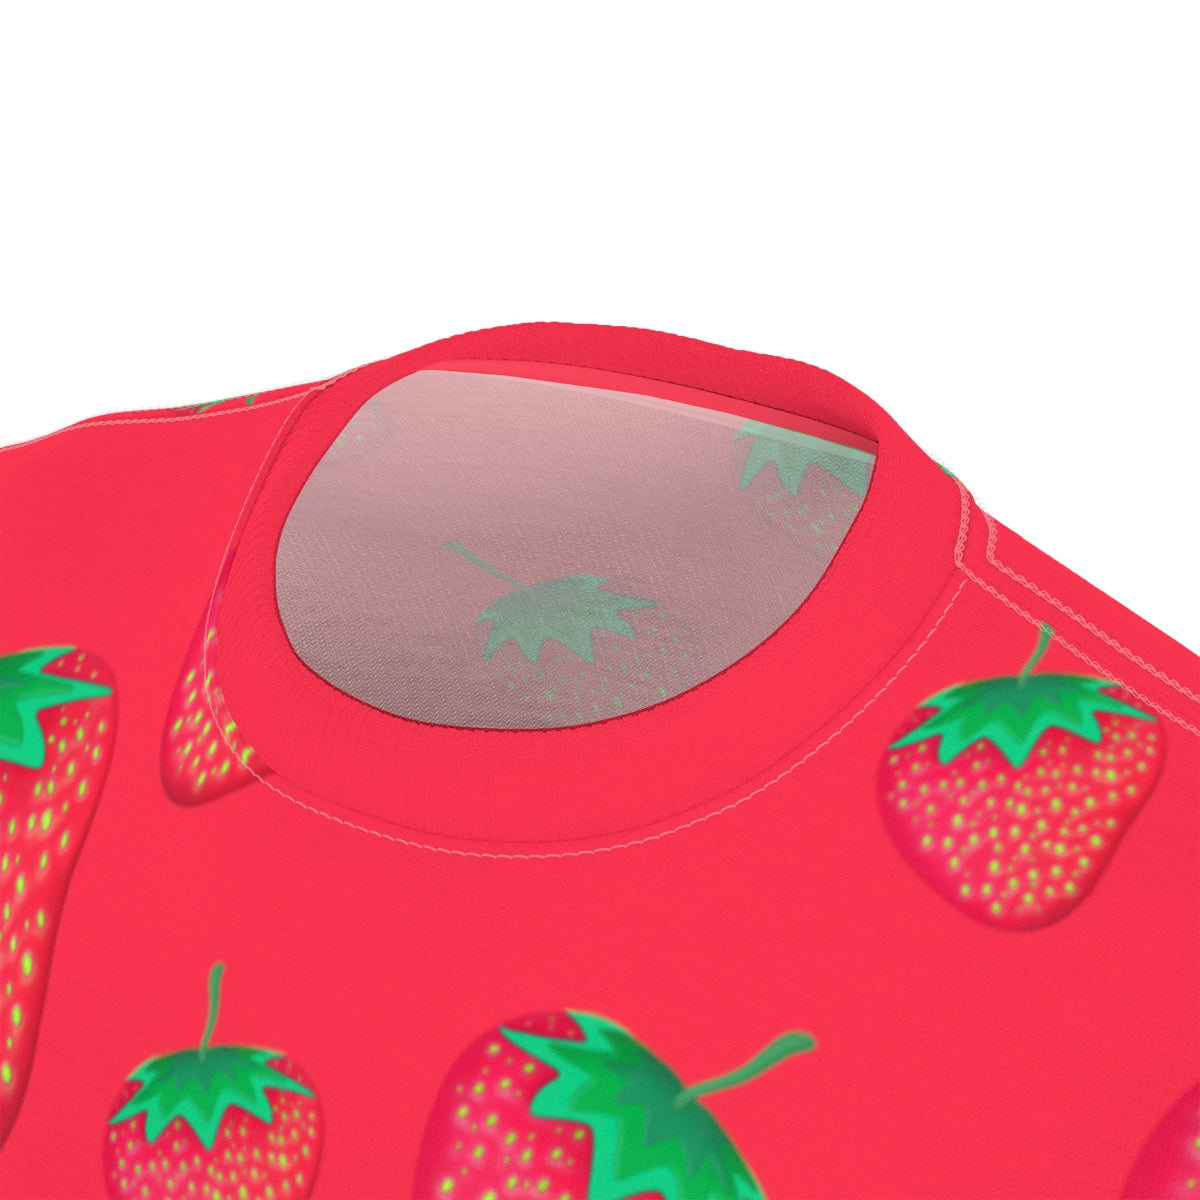 Popping Strawberry | Cocktail party T-shirt